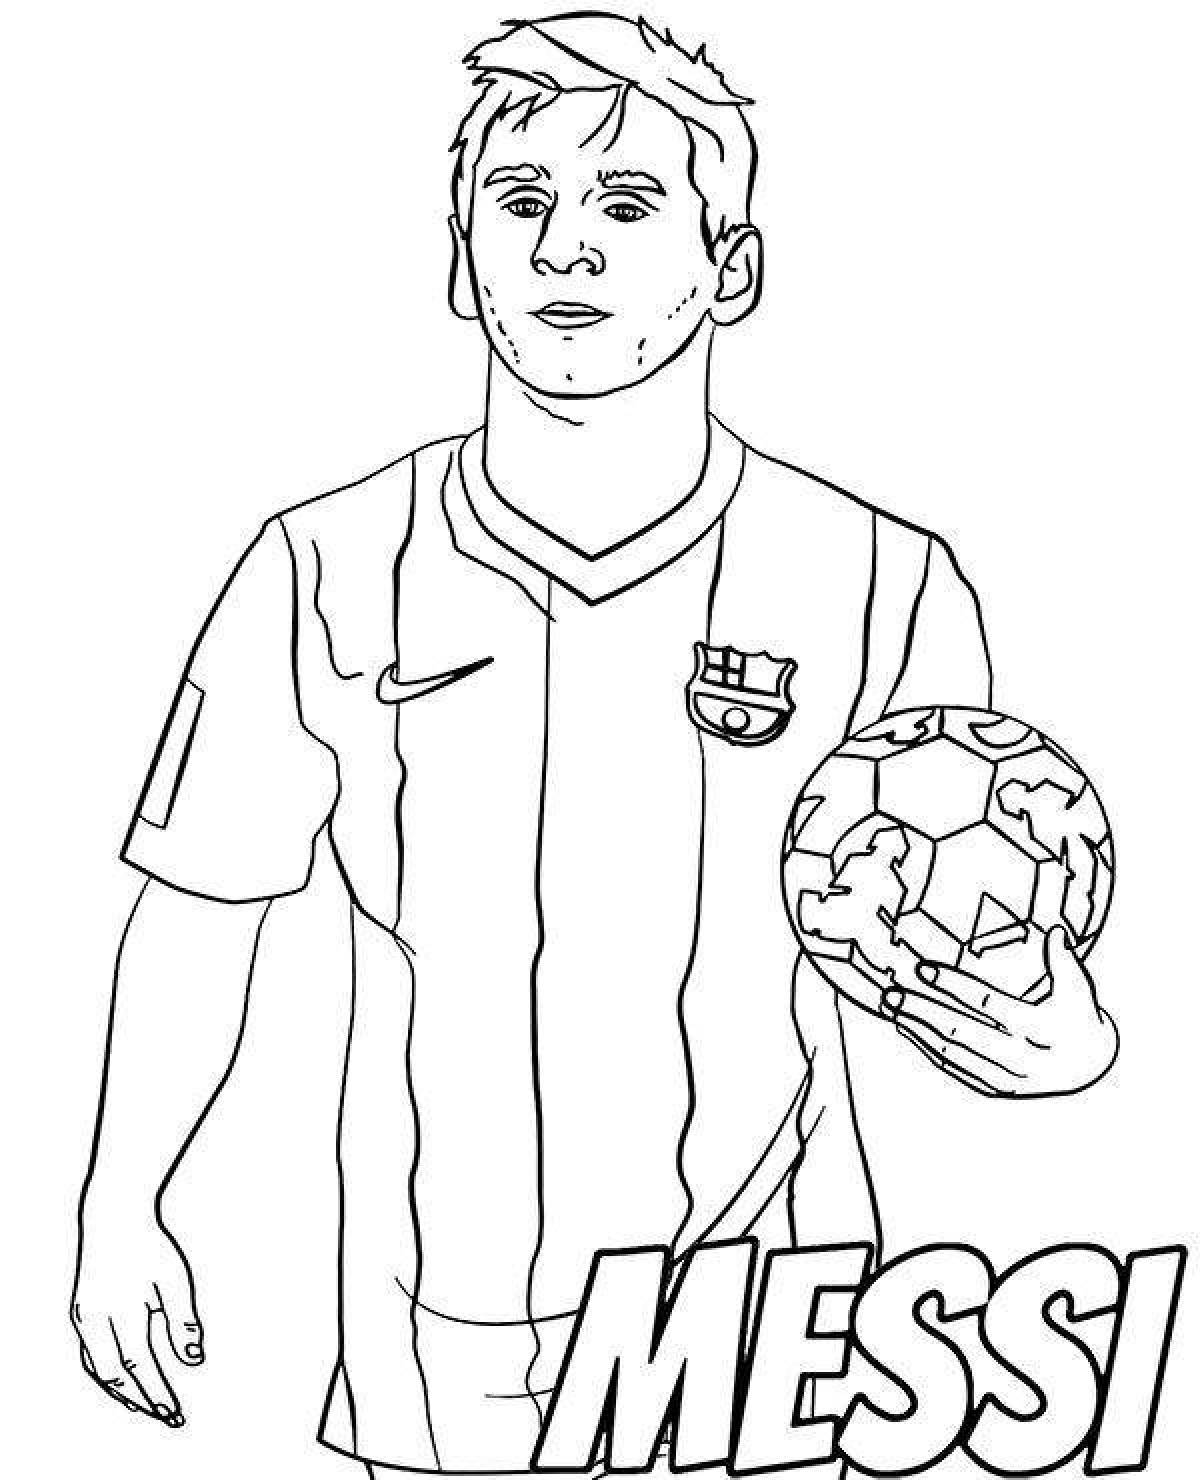 Exquisite ronaldo and messi coloring pages